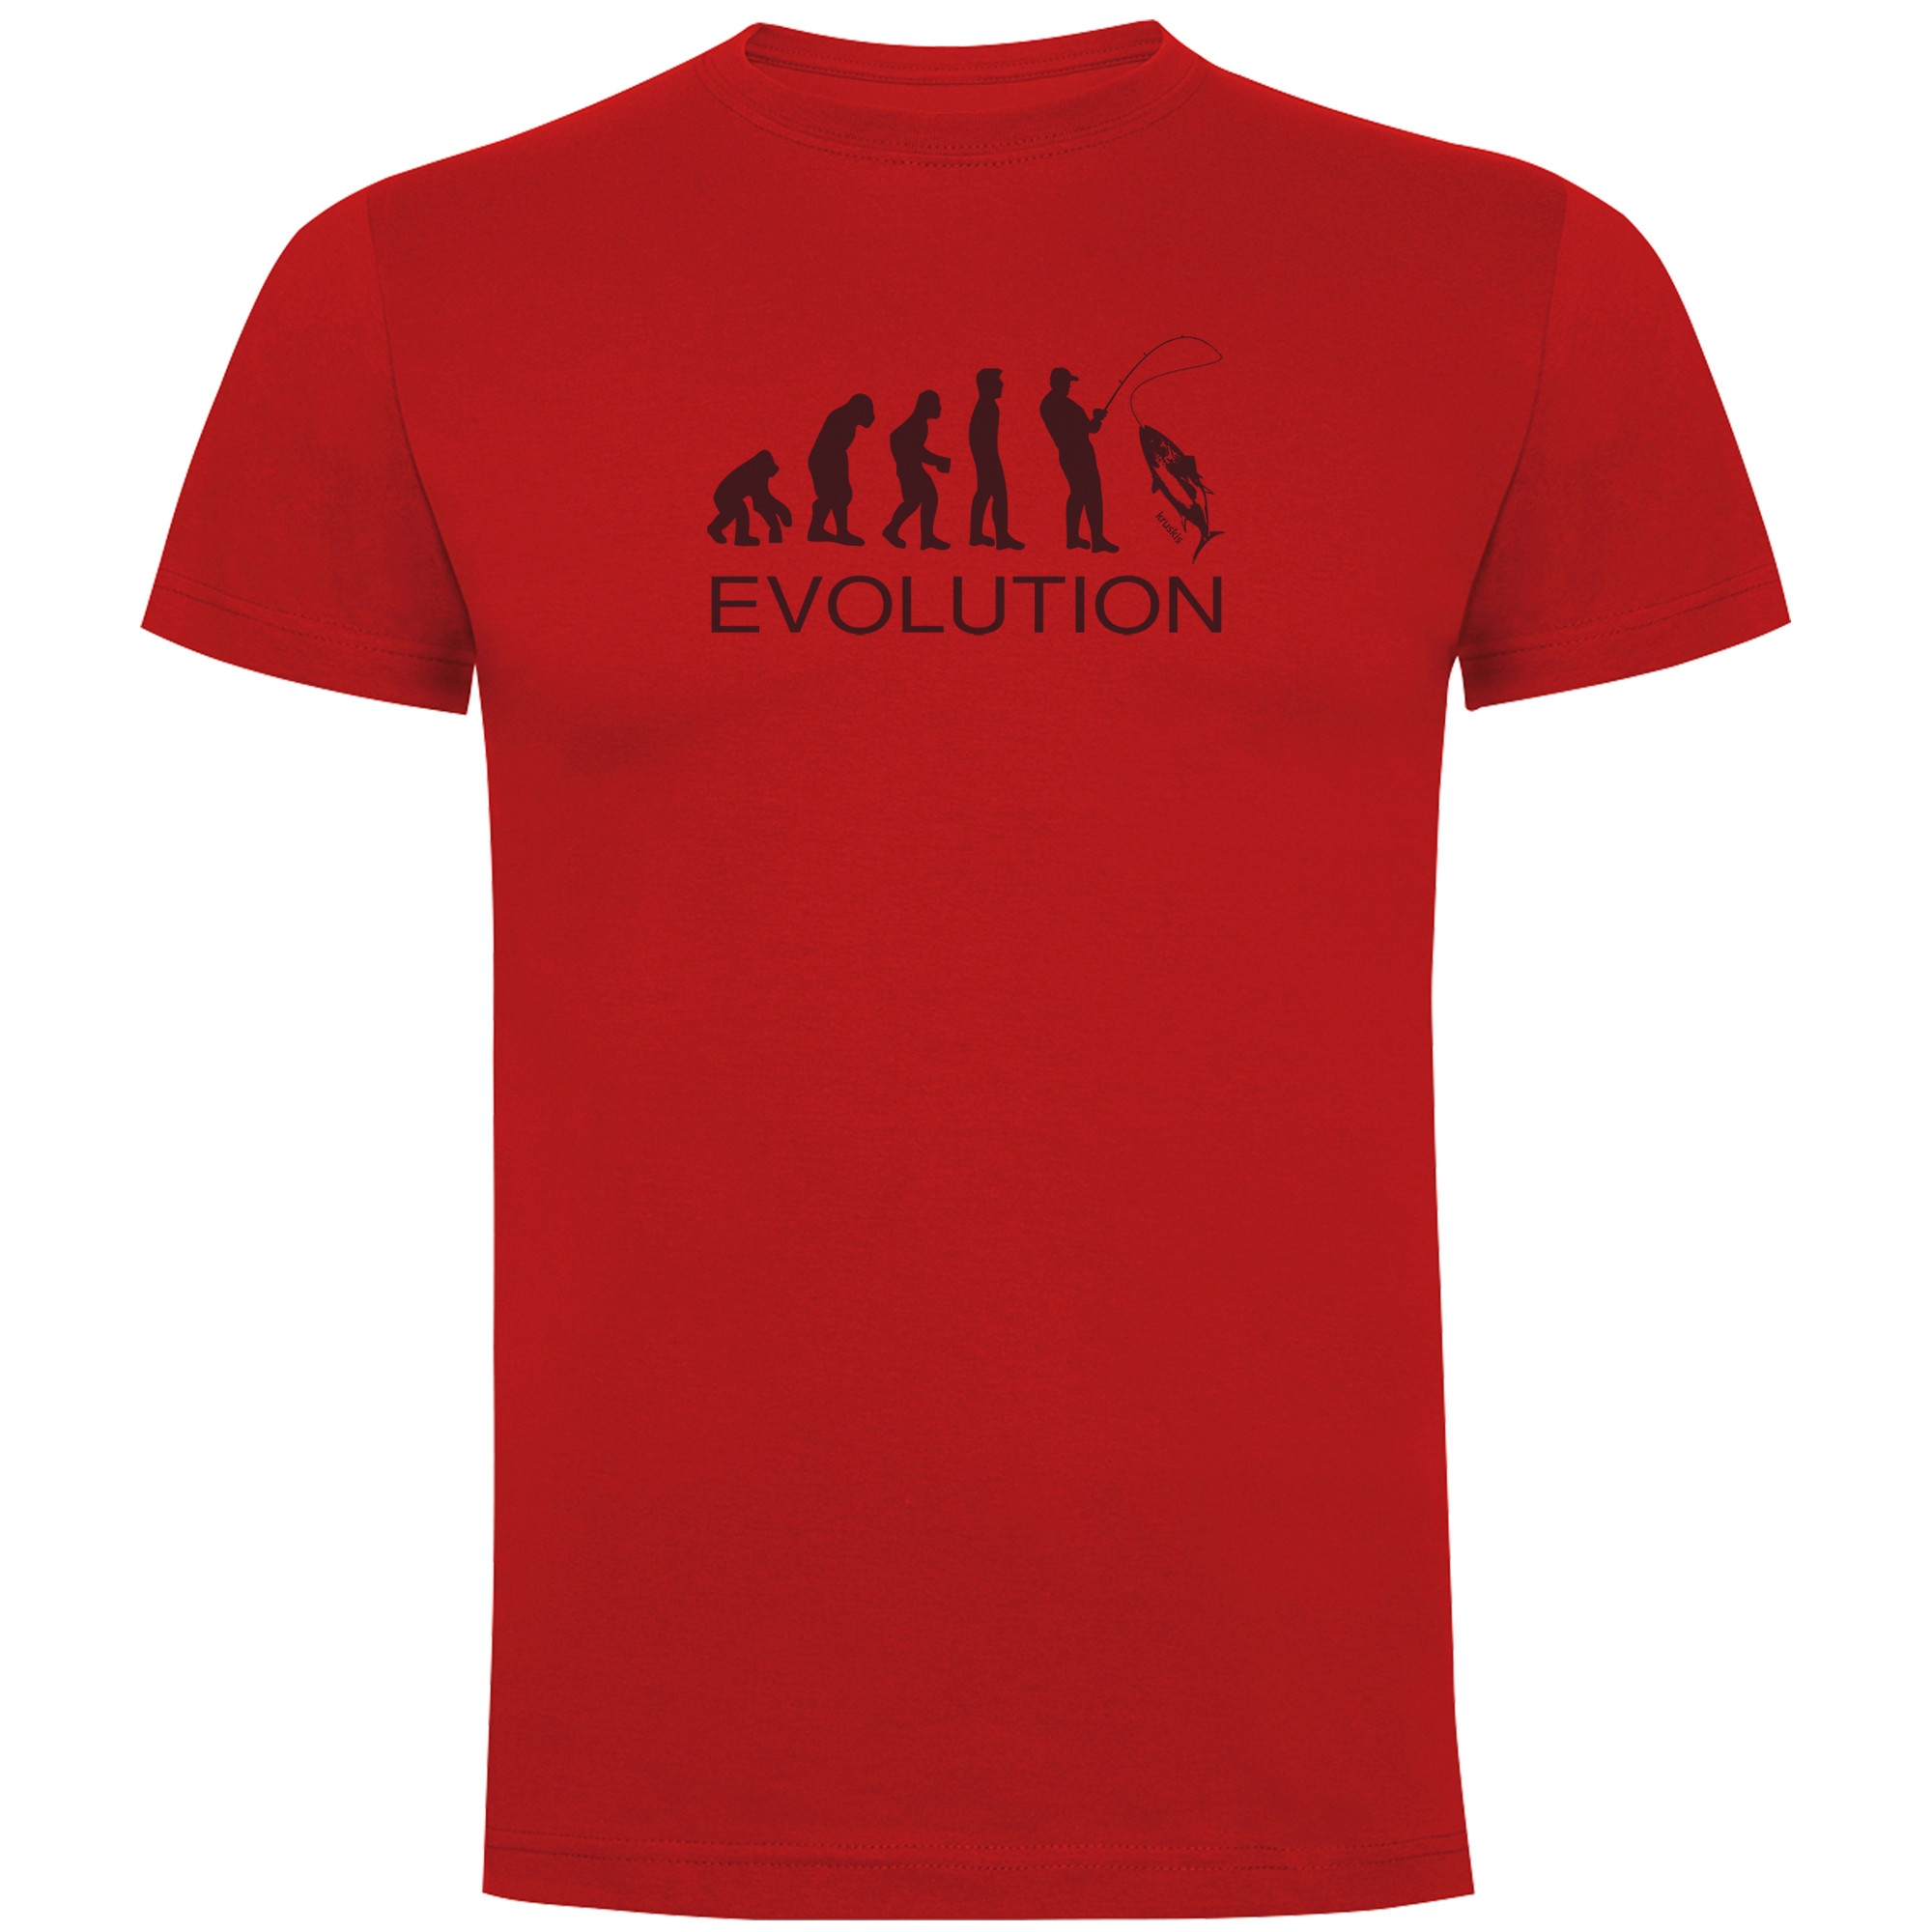 T Shirt Peche Evolution by Anglers Manche Courte Homme